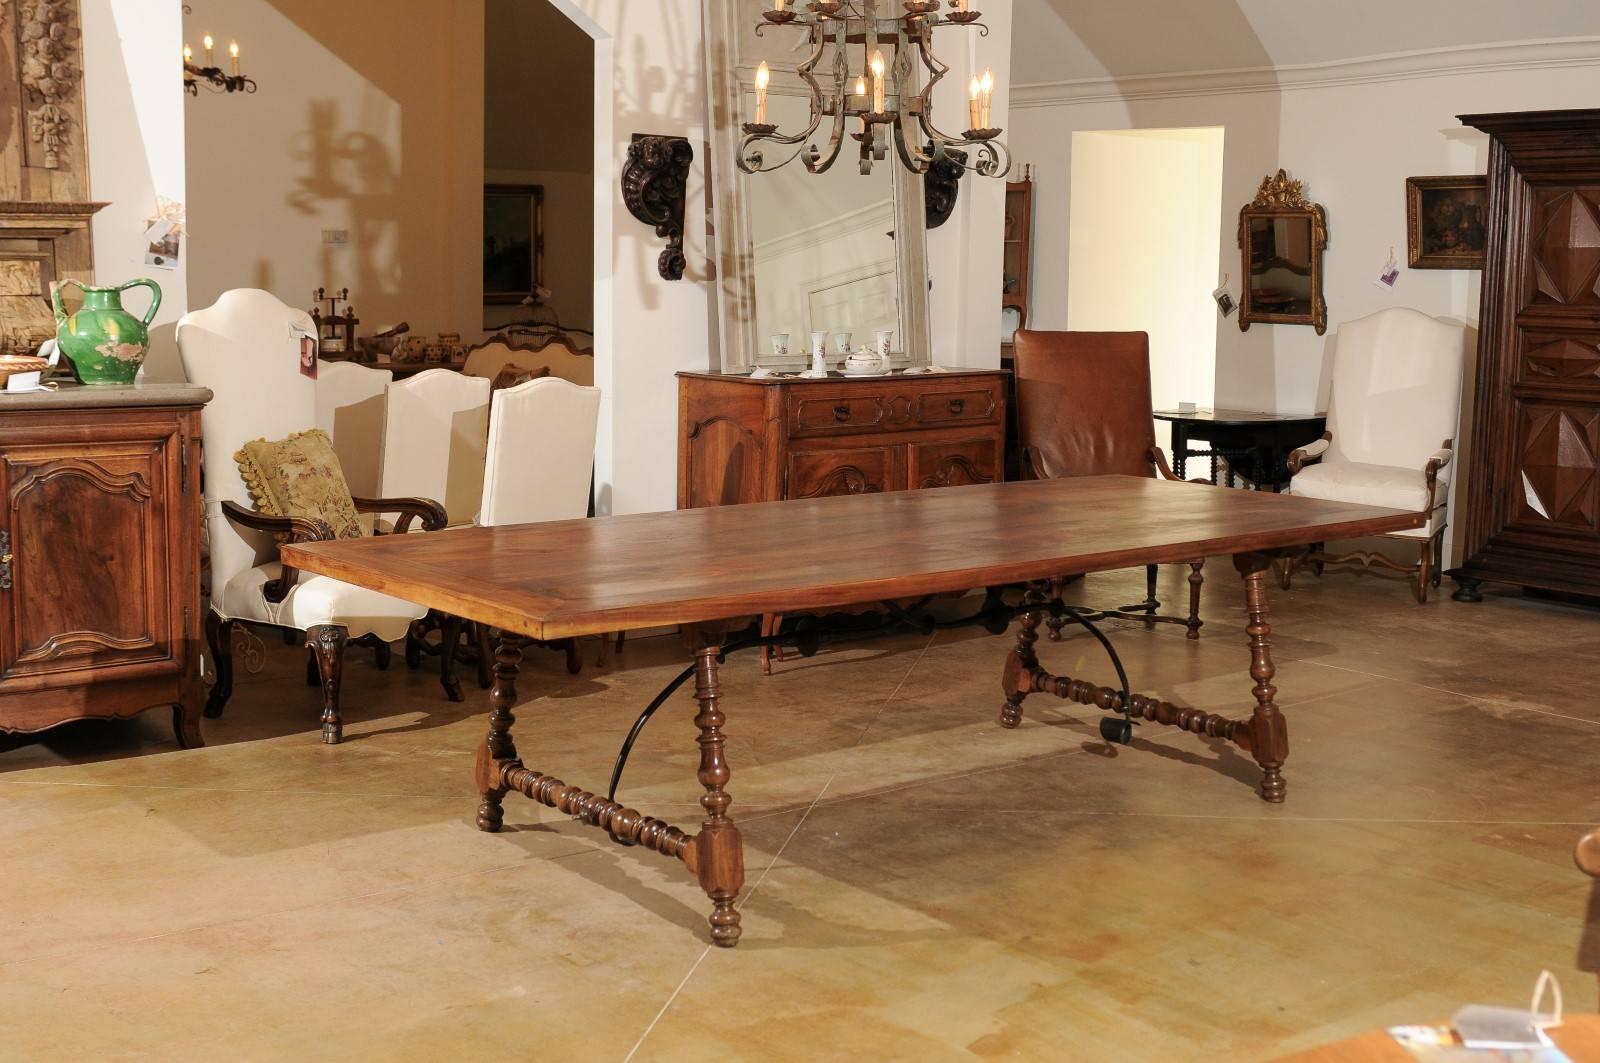 Carved Spanish 18th Century Walnut Fratino Table with Turned Legs and Iron Stretcher